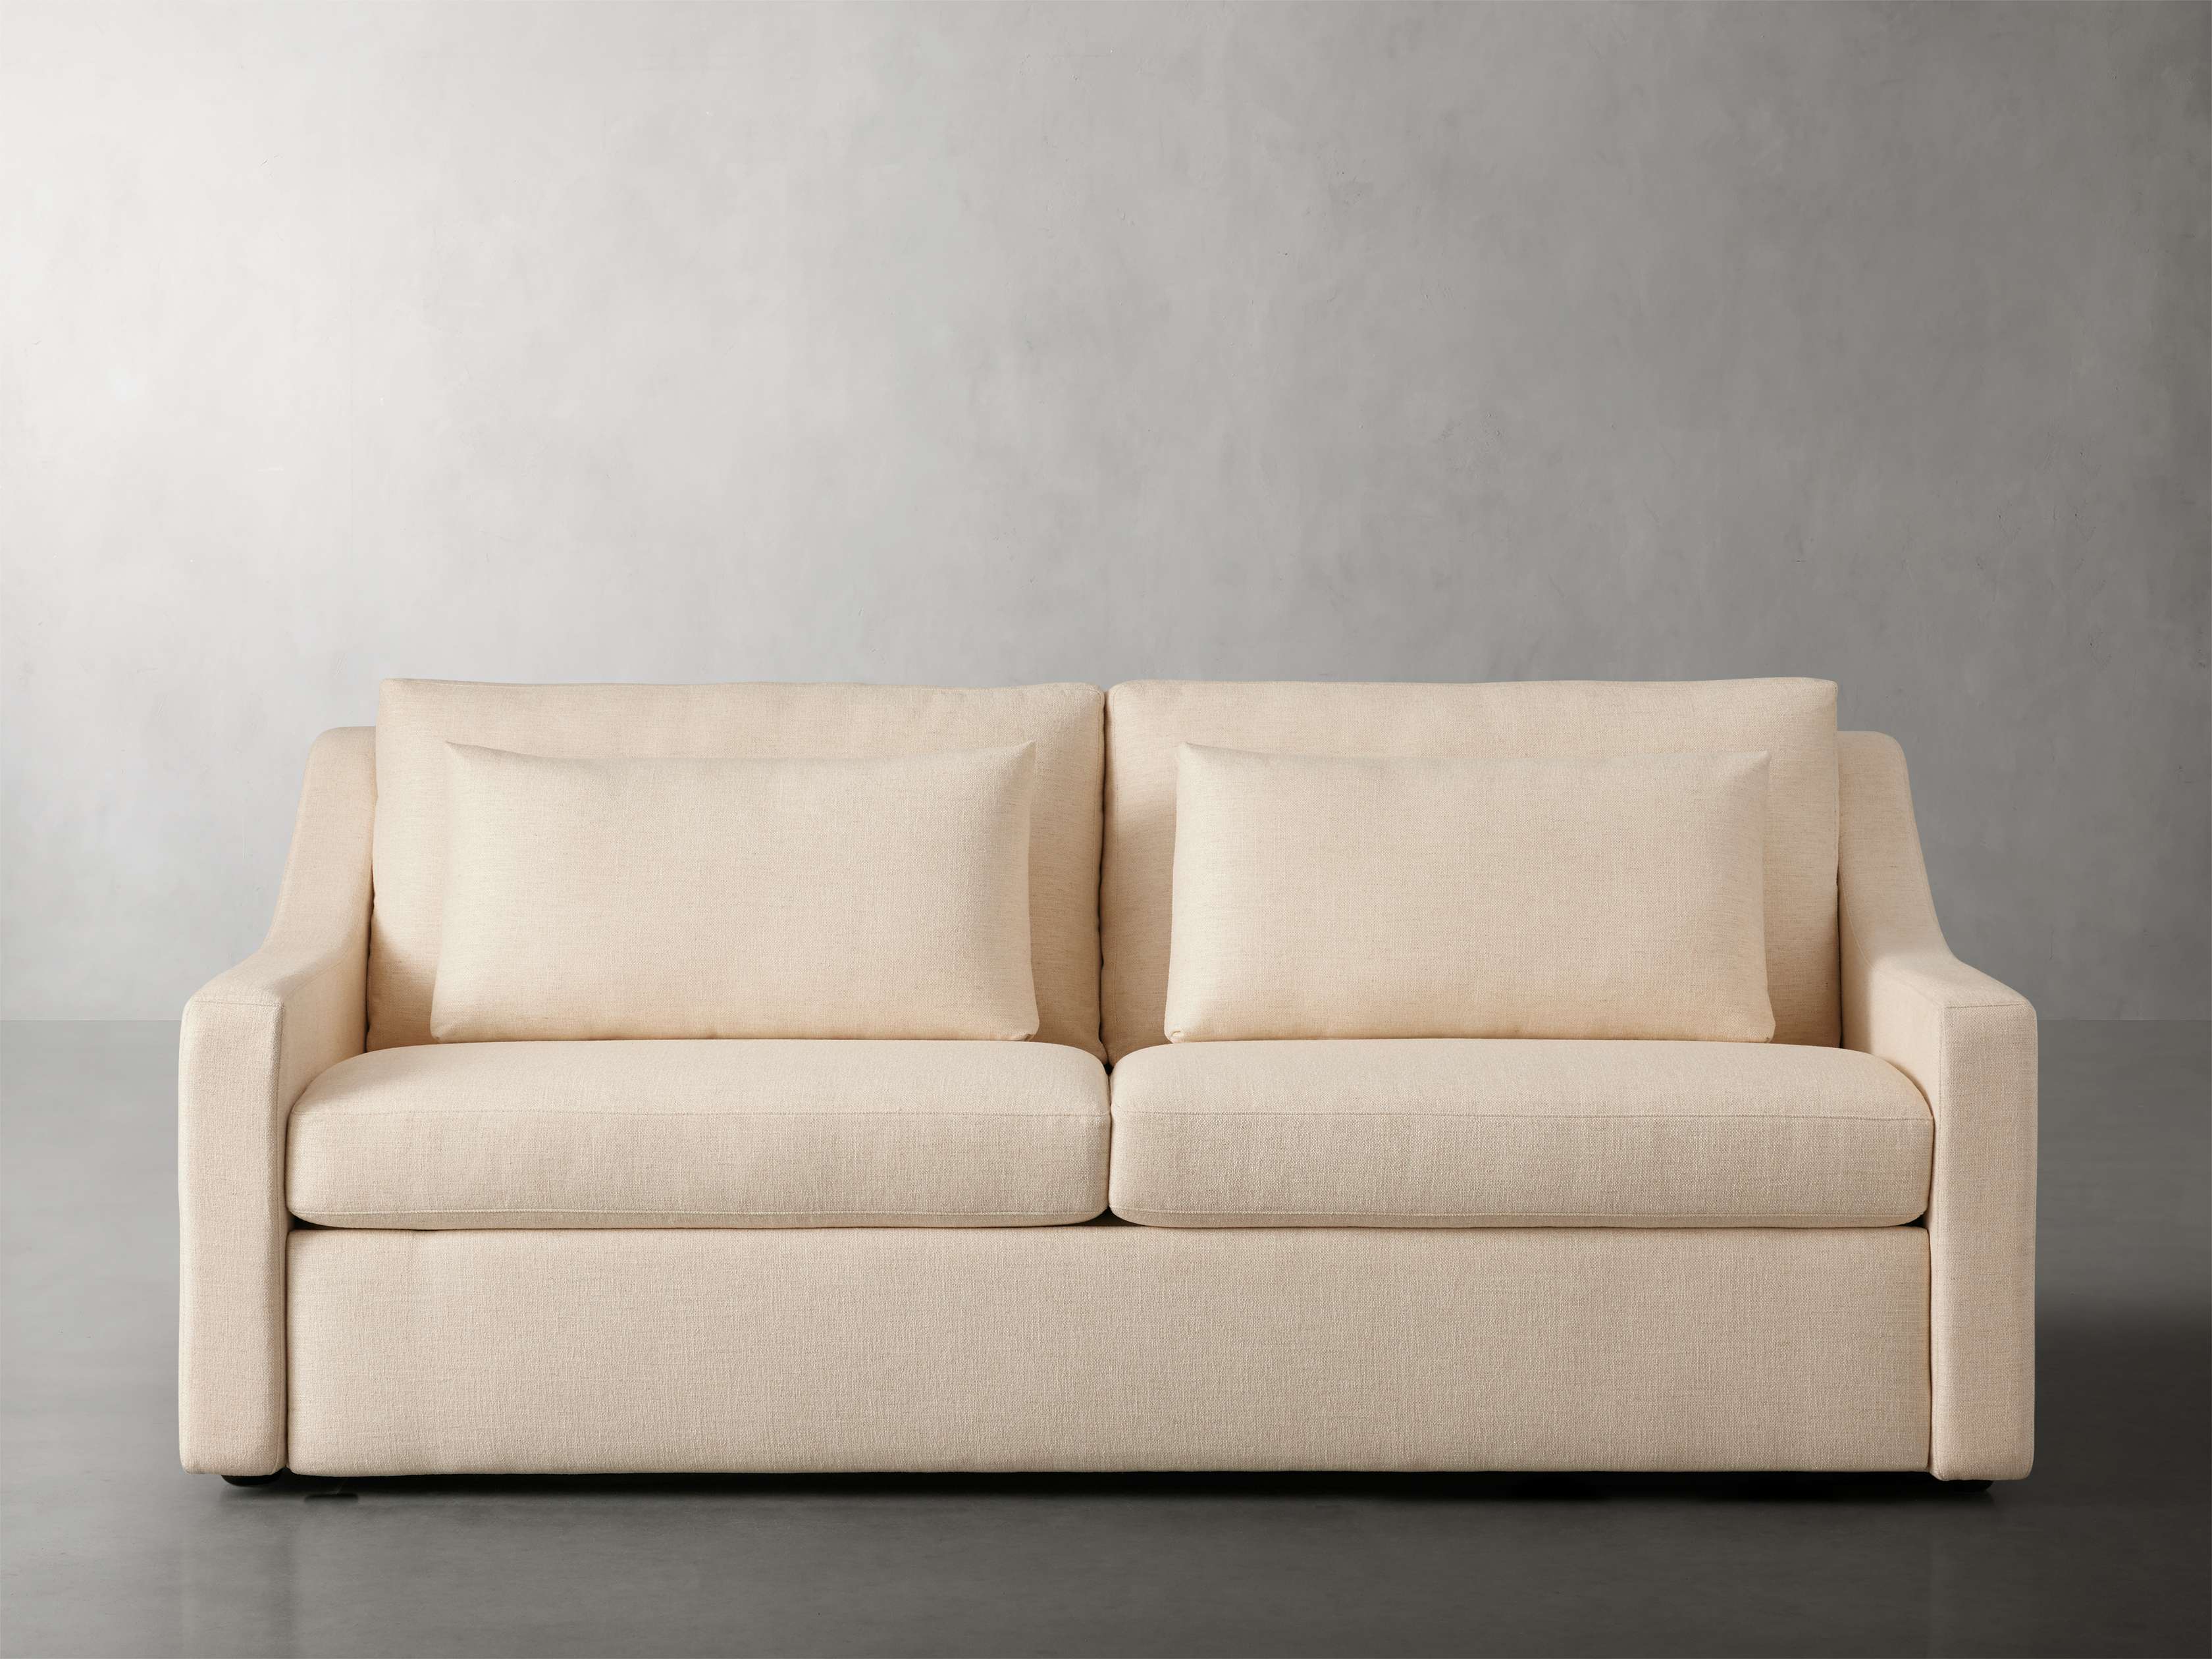 Ashby Luxury Sleeper Sofa in Wiley Parchment – Arhaus